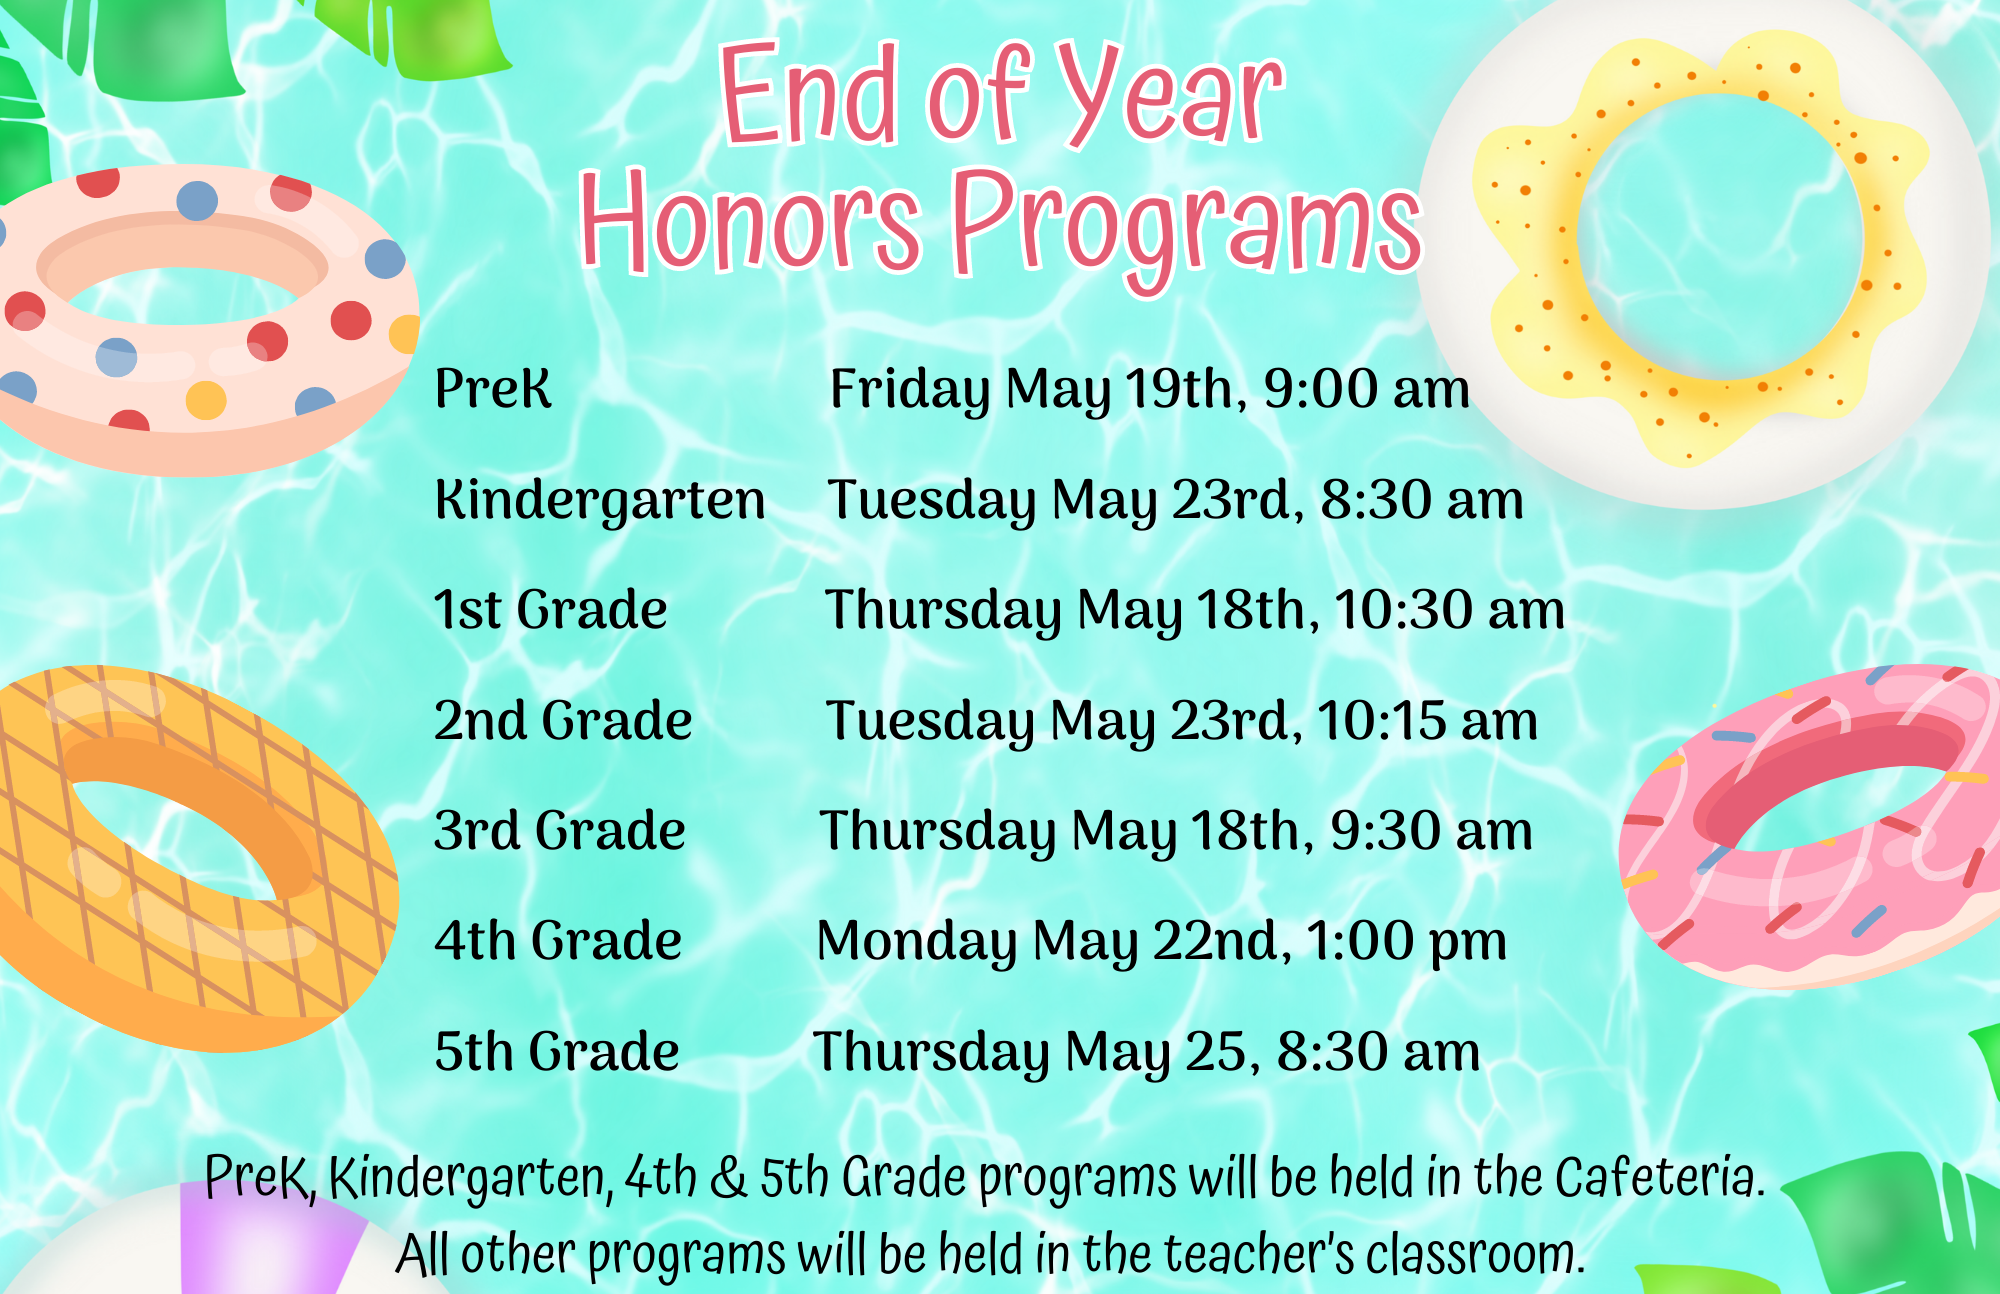 End of Year programs